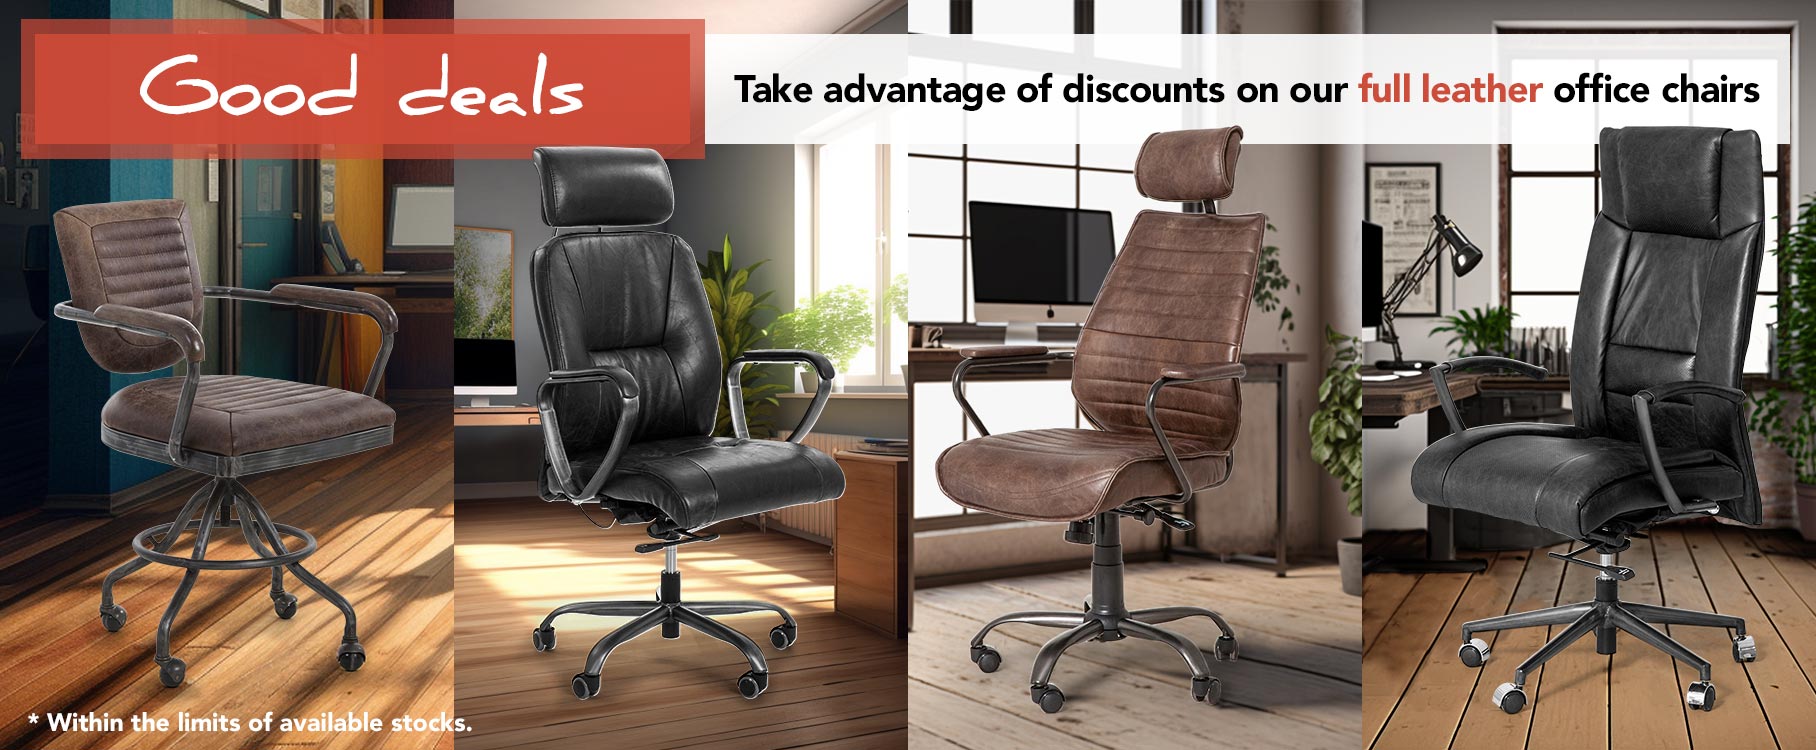 Special offer on our leather office chairs